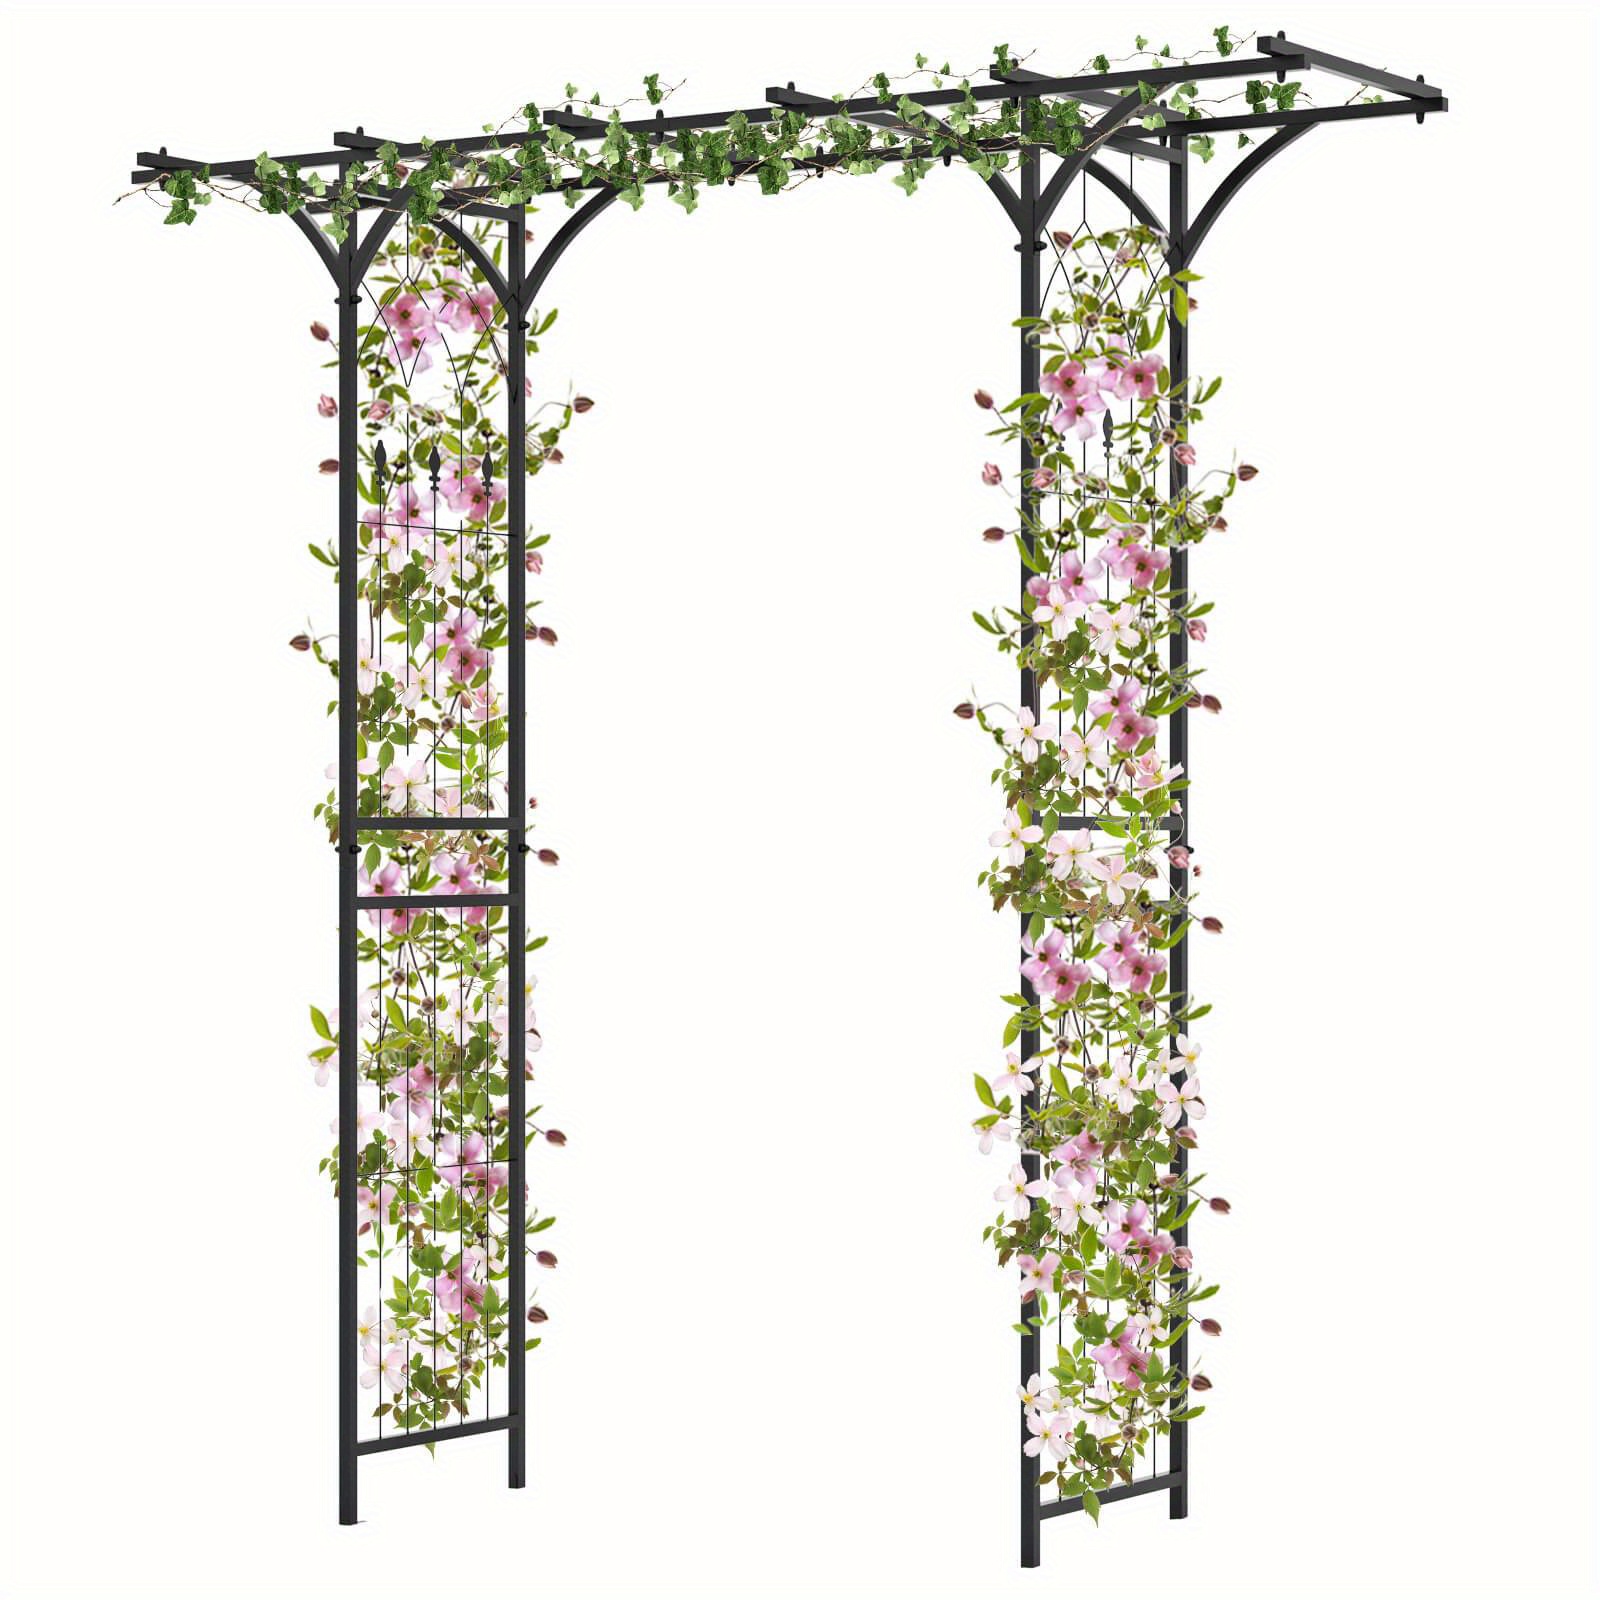 

Maxmass 6.8 Ft Flat Top Garden Arch W/ Trellises & Extended Roof For Climbing Plants